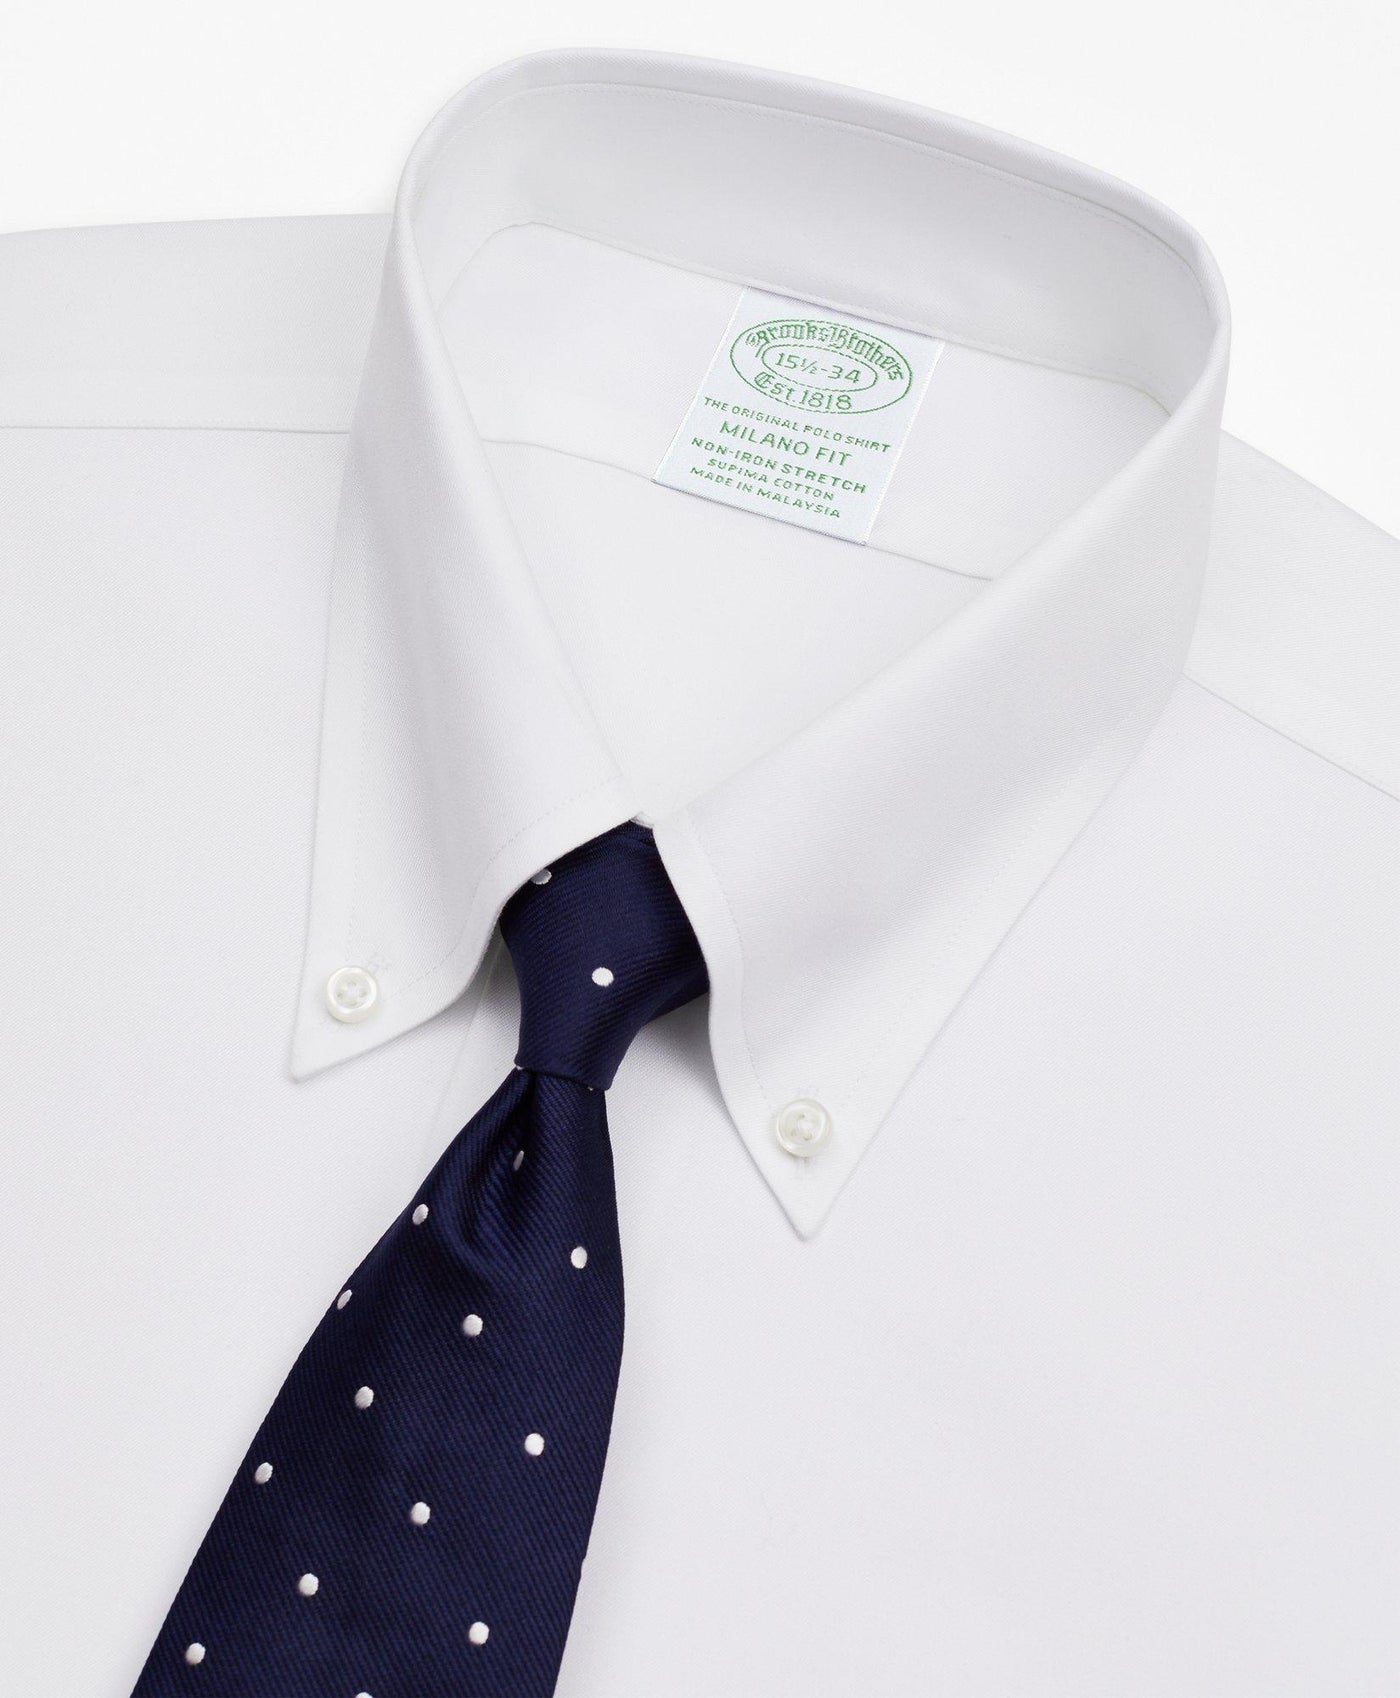 Stretch Milano Slim-Fit Dress Shirt, Non-Iron Twill Button-Down Collar - Brooks Brothers Canada